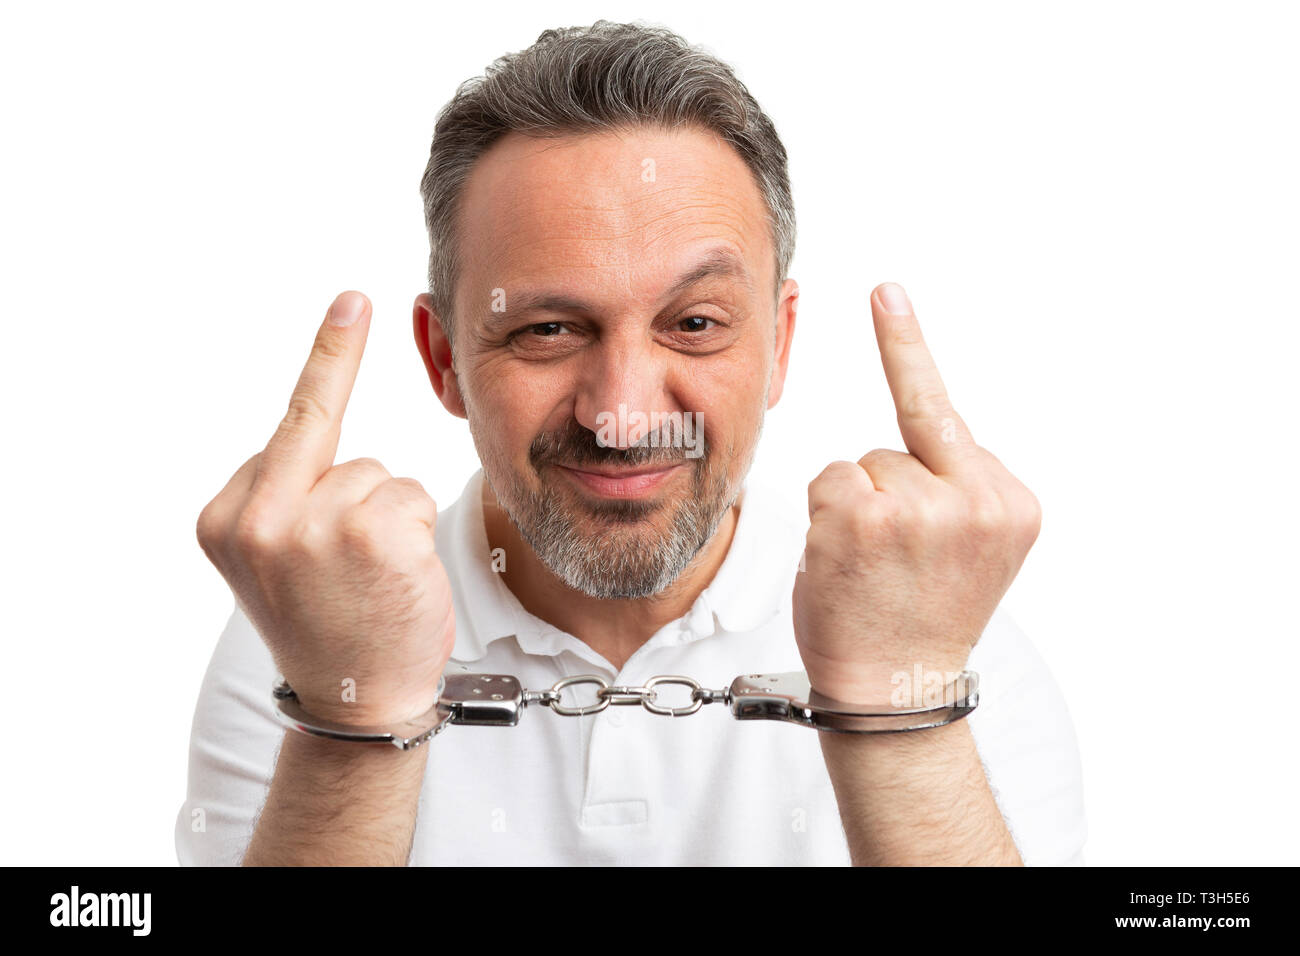 Man, gesture, middle finger, model released, businessman, annoys, hand,  finger, gesture, indecently, vulgarly, insults, Stinkefinger, annoyance,  annoyance, term abuse, fight, conflict, decency, background blur very close  Stock Photo - Alamy